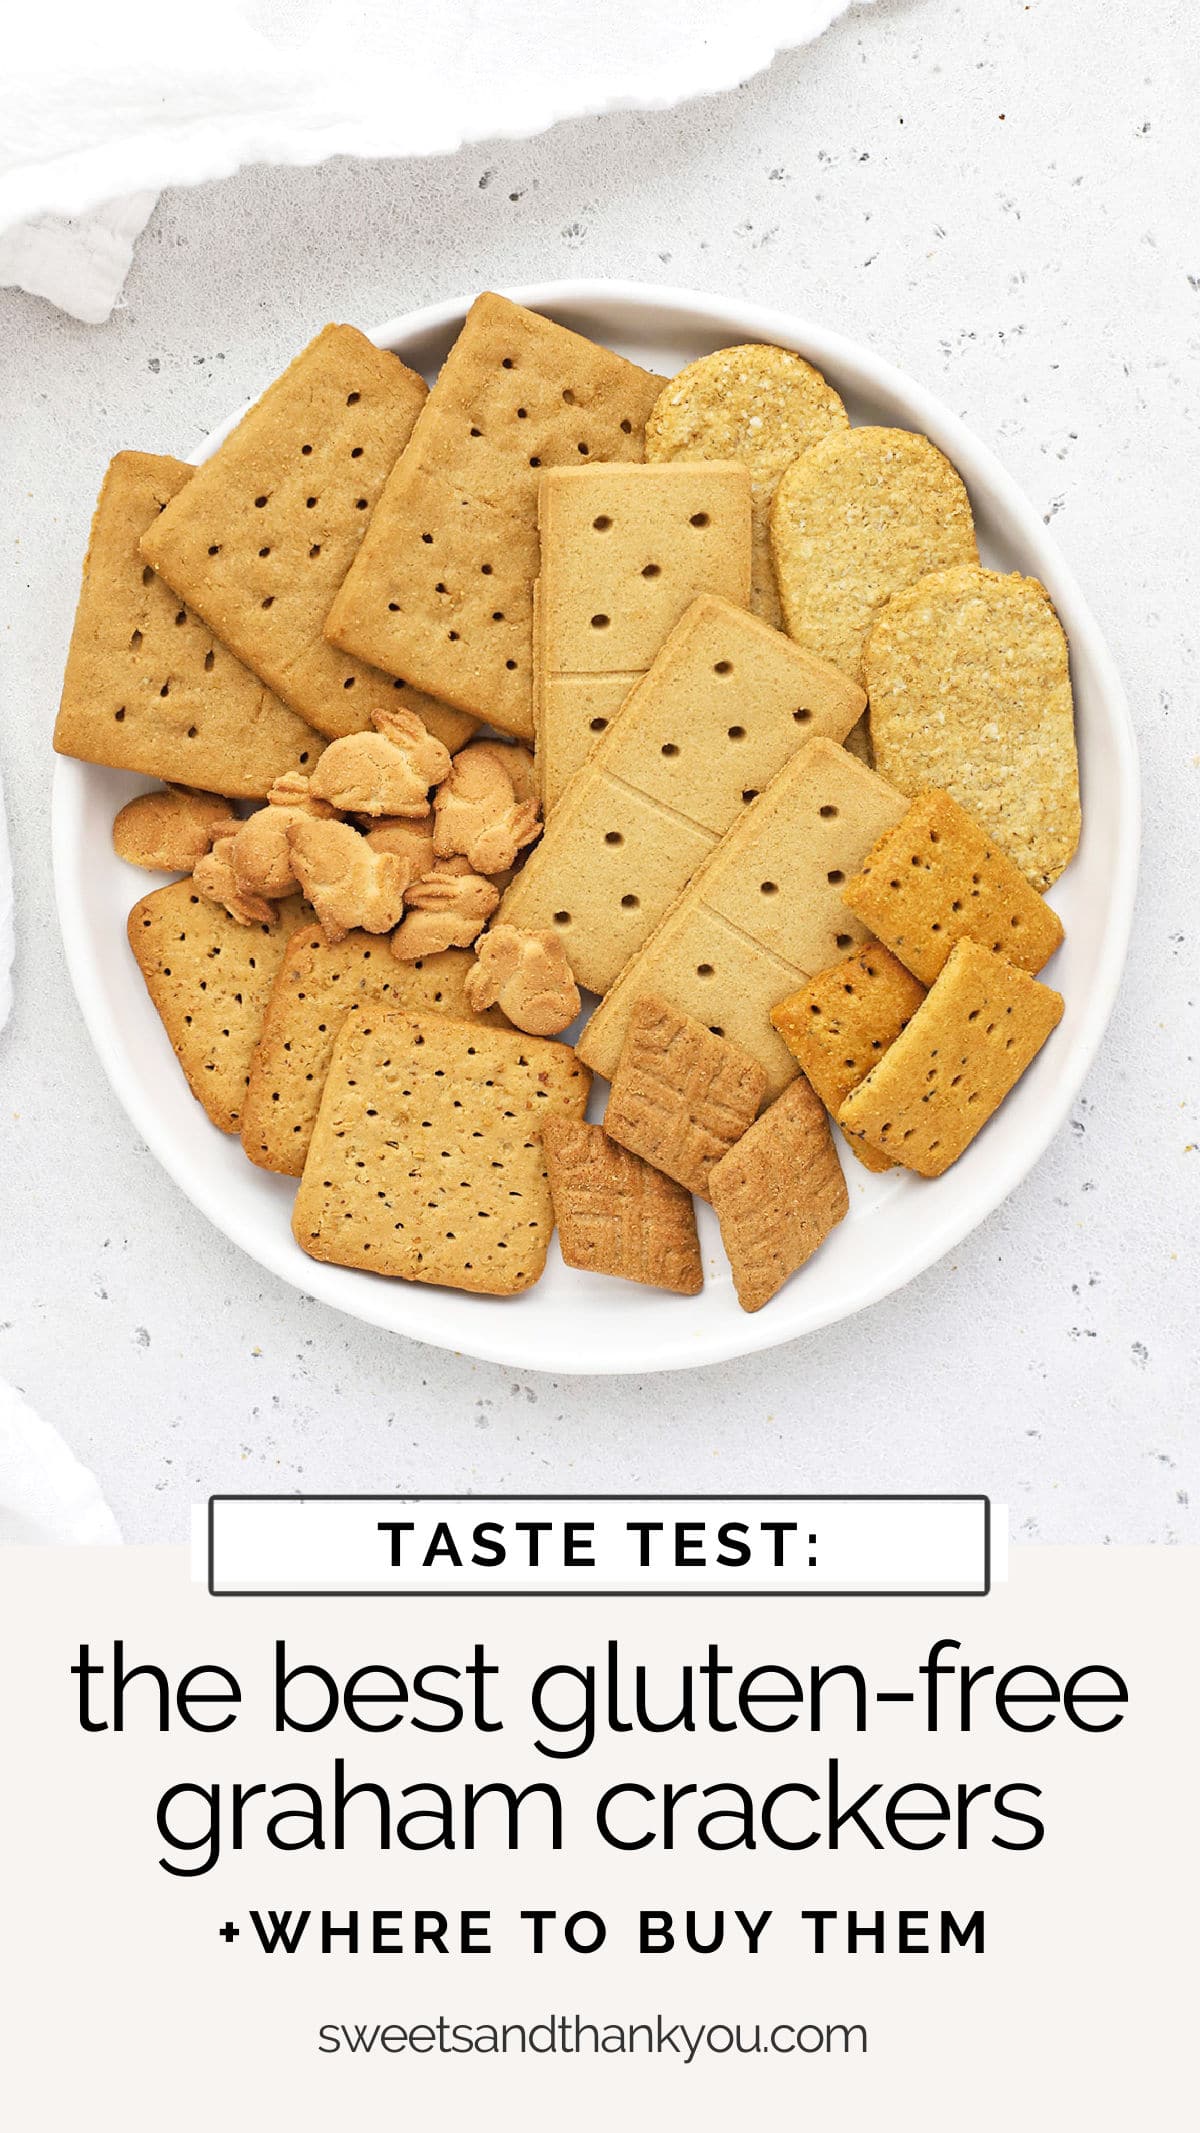 The Best Store-Bought Gluten-Free Graham Crackers - Which brands of graham crackers are gluten-free? Which brand of gluten-free graham crackers are the best? We did a taste-test so you don't have to! // the best storebought gluten-free graham crackers // the best gluten-free graham crackers // what brands of graham crackers are gluten-free? best gluten-free graham cracker brands